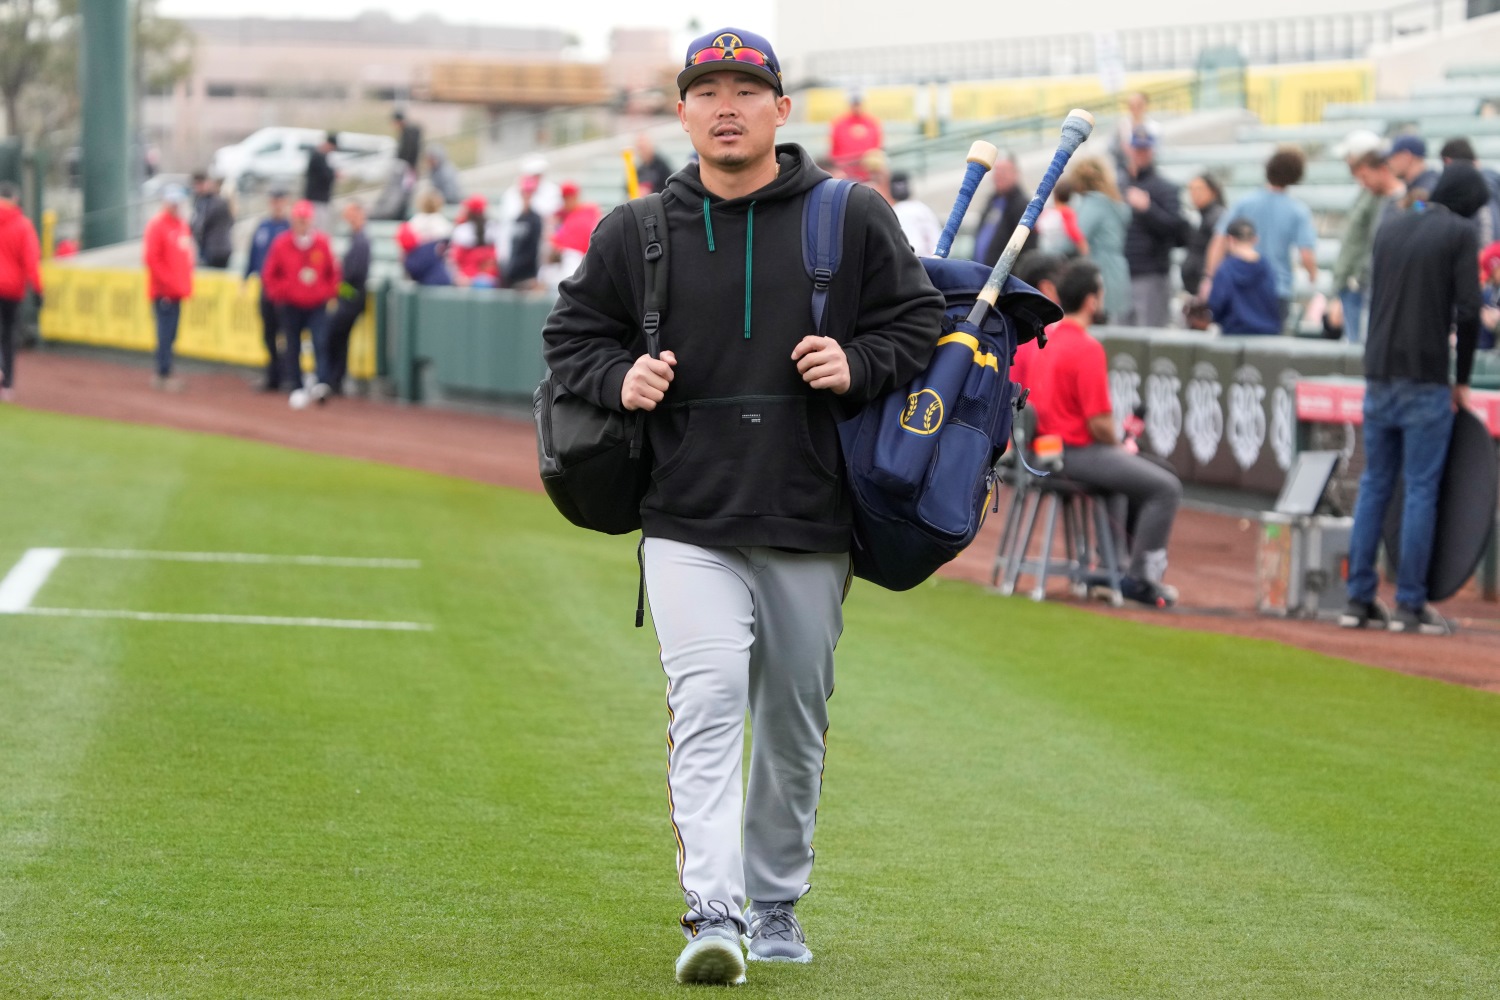 NEWS: Keston Hiura, Tyler Naquin Will Not Make Brewers' Roster: What It  Means, and for Whom - Brewers - Brewer Fanatic